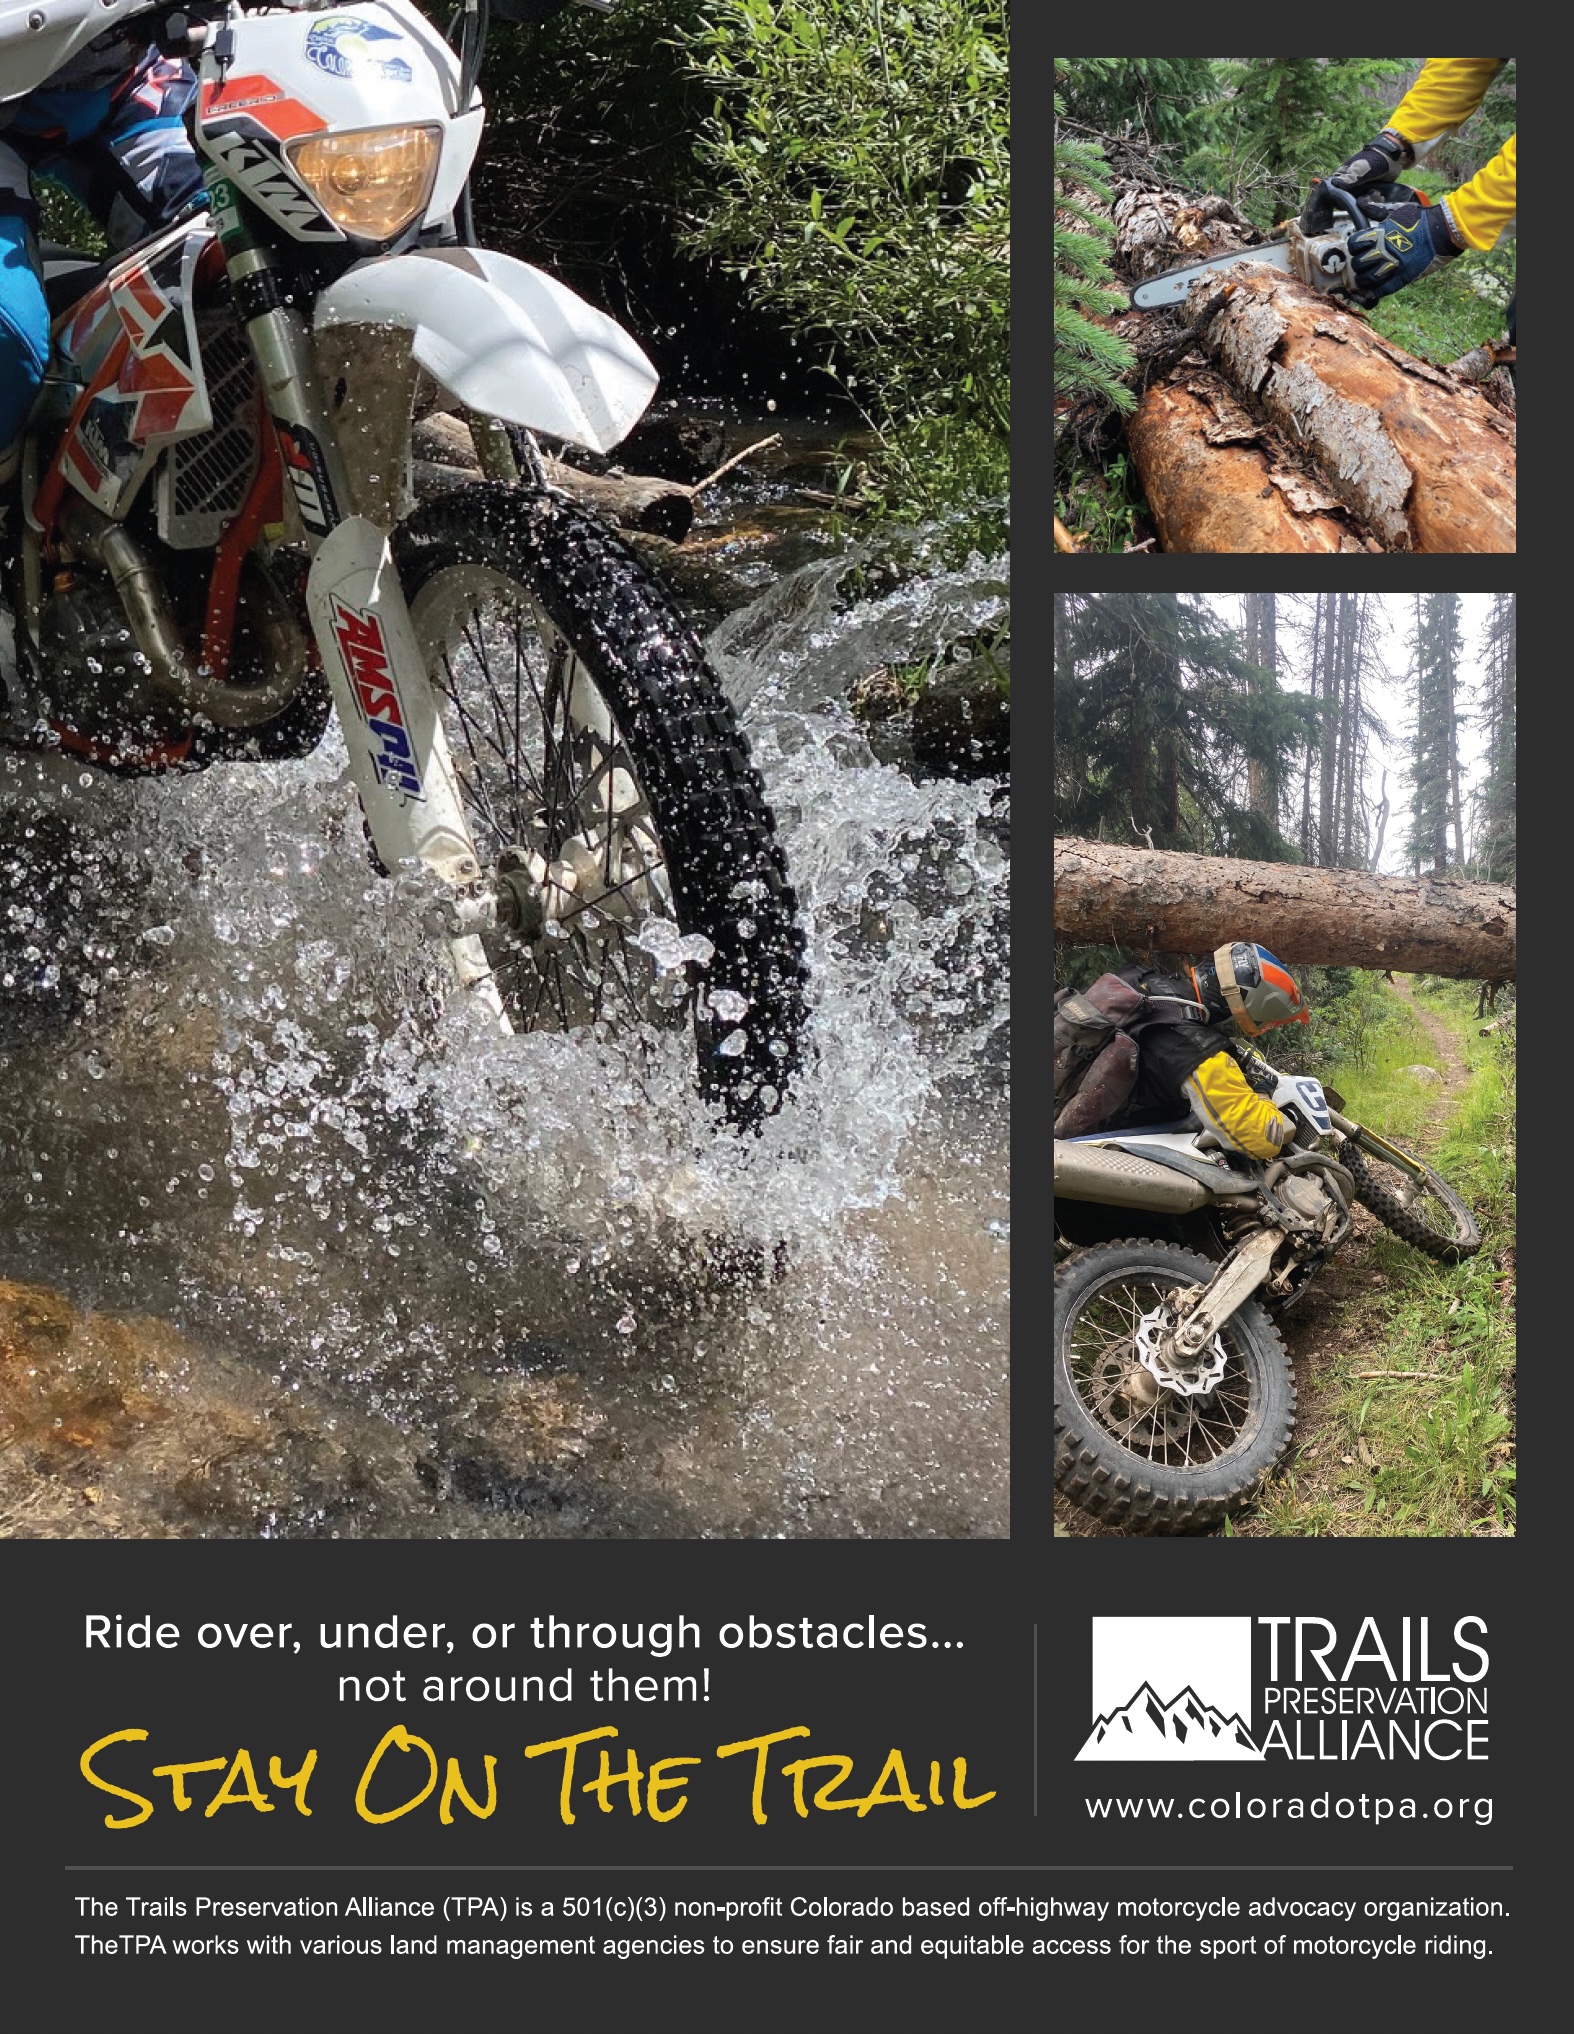 Stay on the Trail - UPSHIFT ad